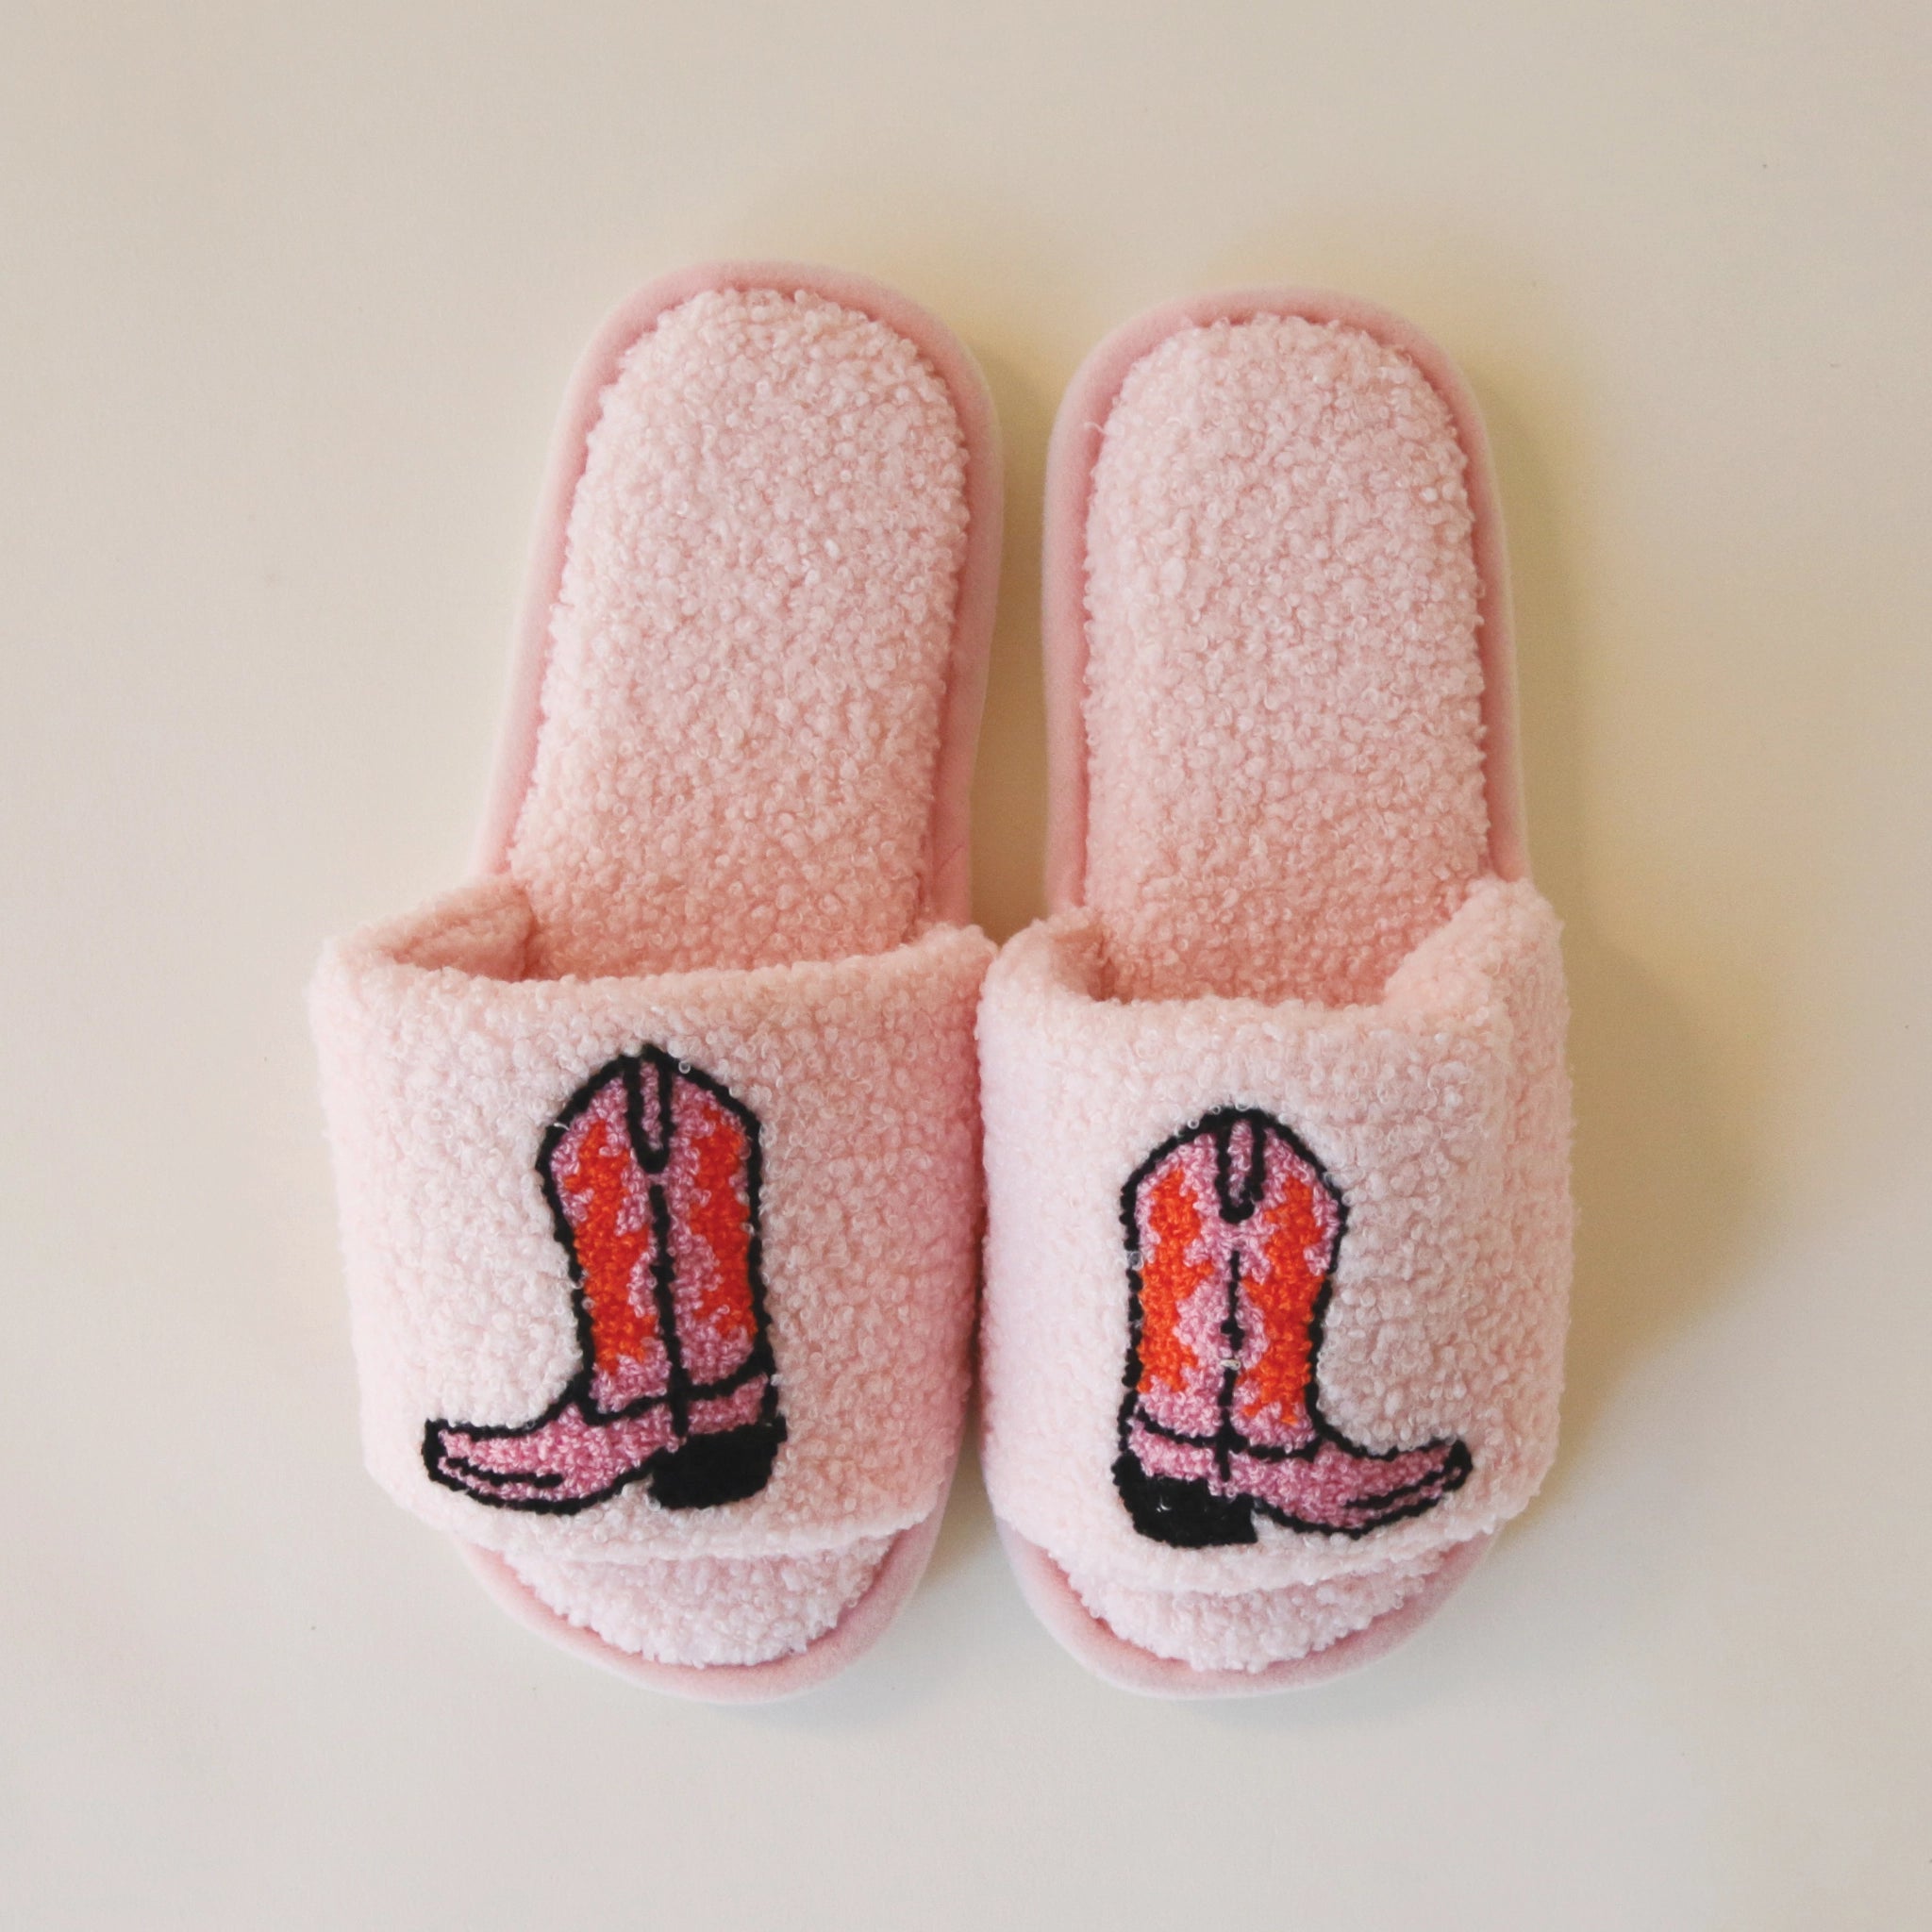 Pink fuzzy slide slippers with an open toe front and a pink and red cowgirl boot graphic on the top.